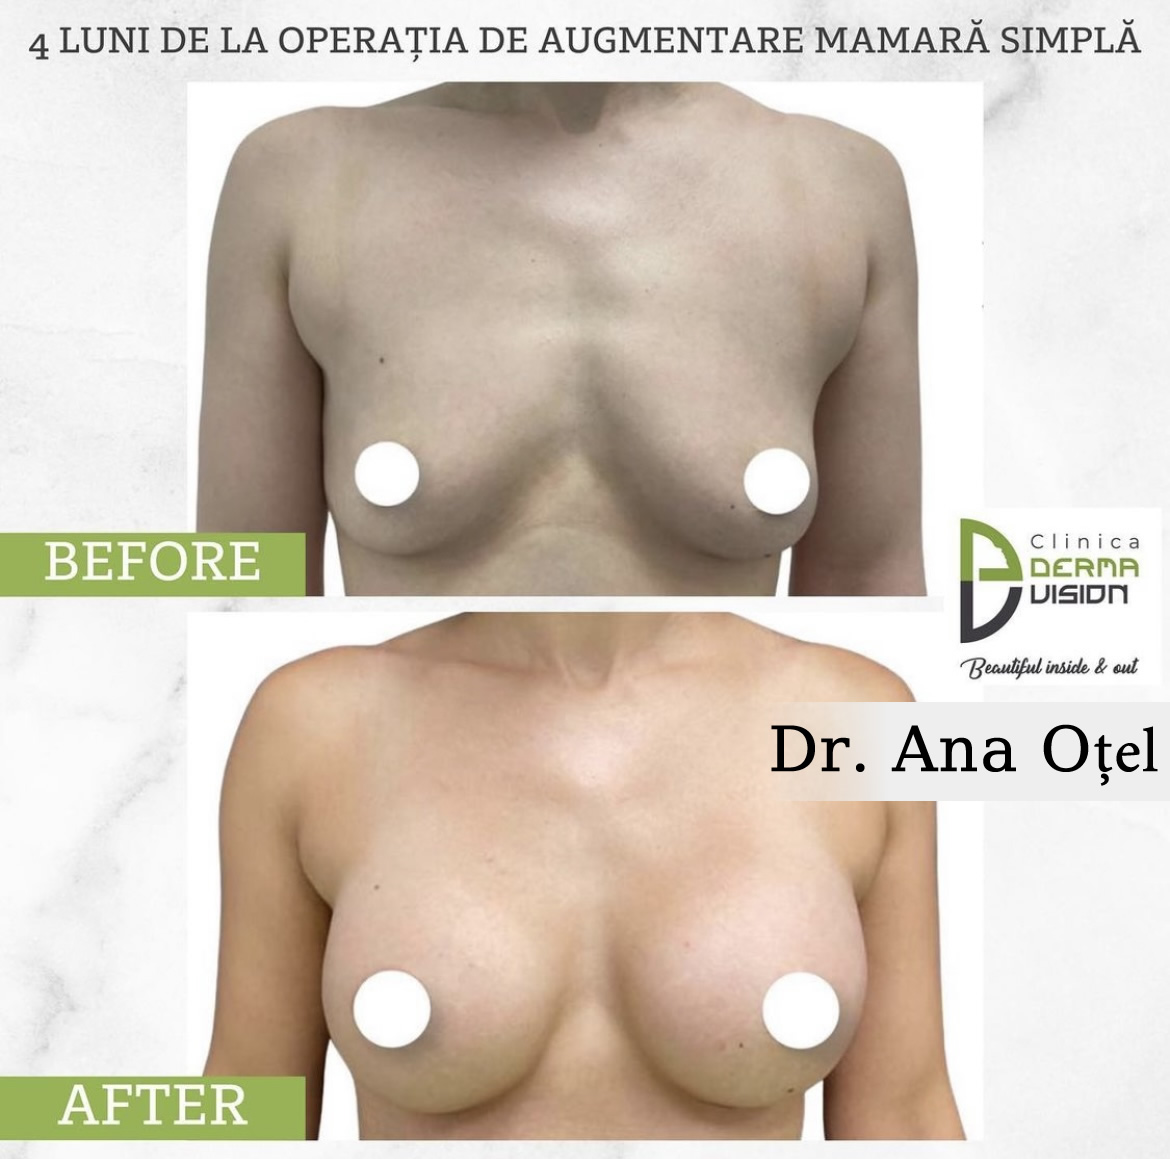 before-after3 augmentare